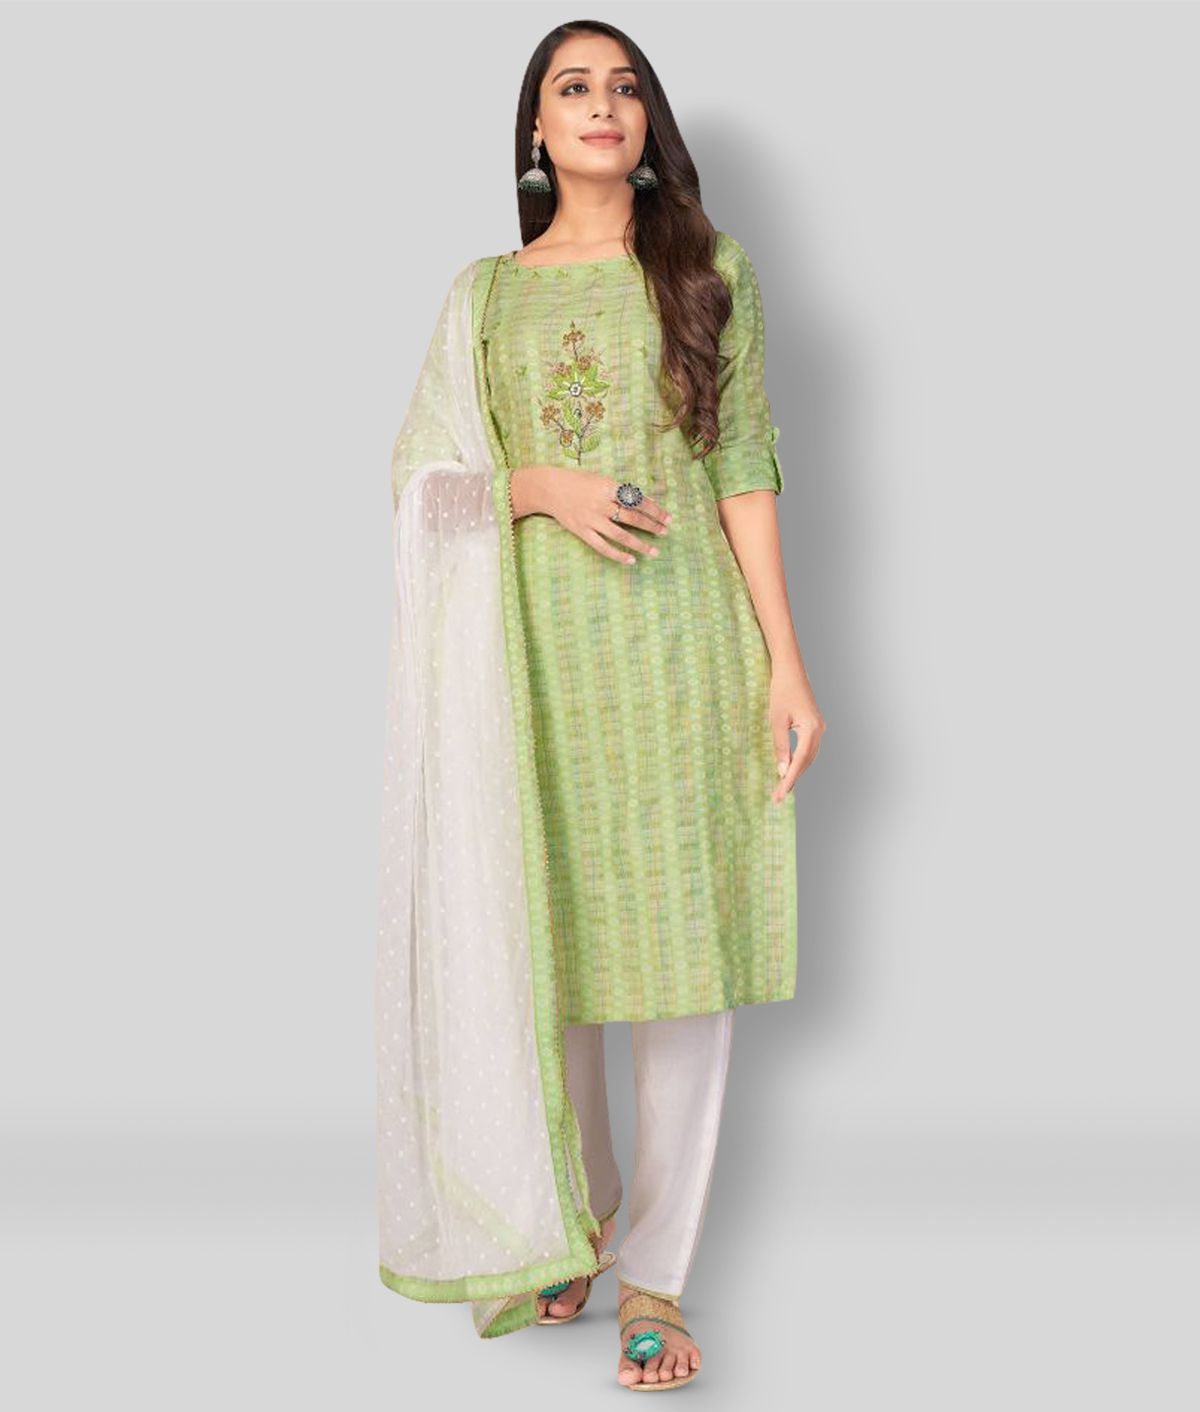     			Vbuyz - Green Straight Cotton Women's Stitched Salwar Suit ( Pack of 1 )